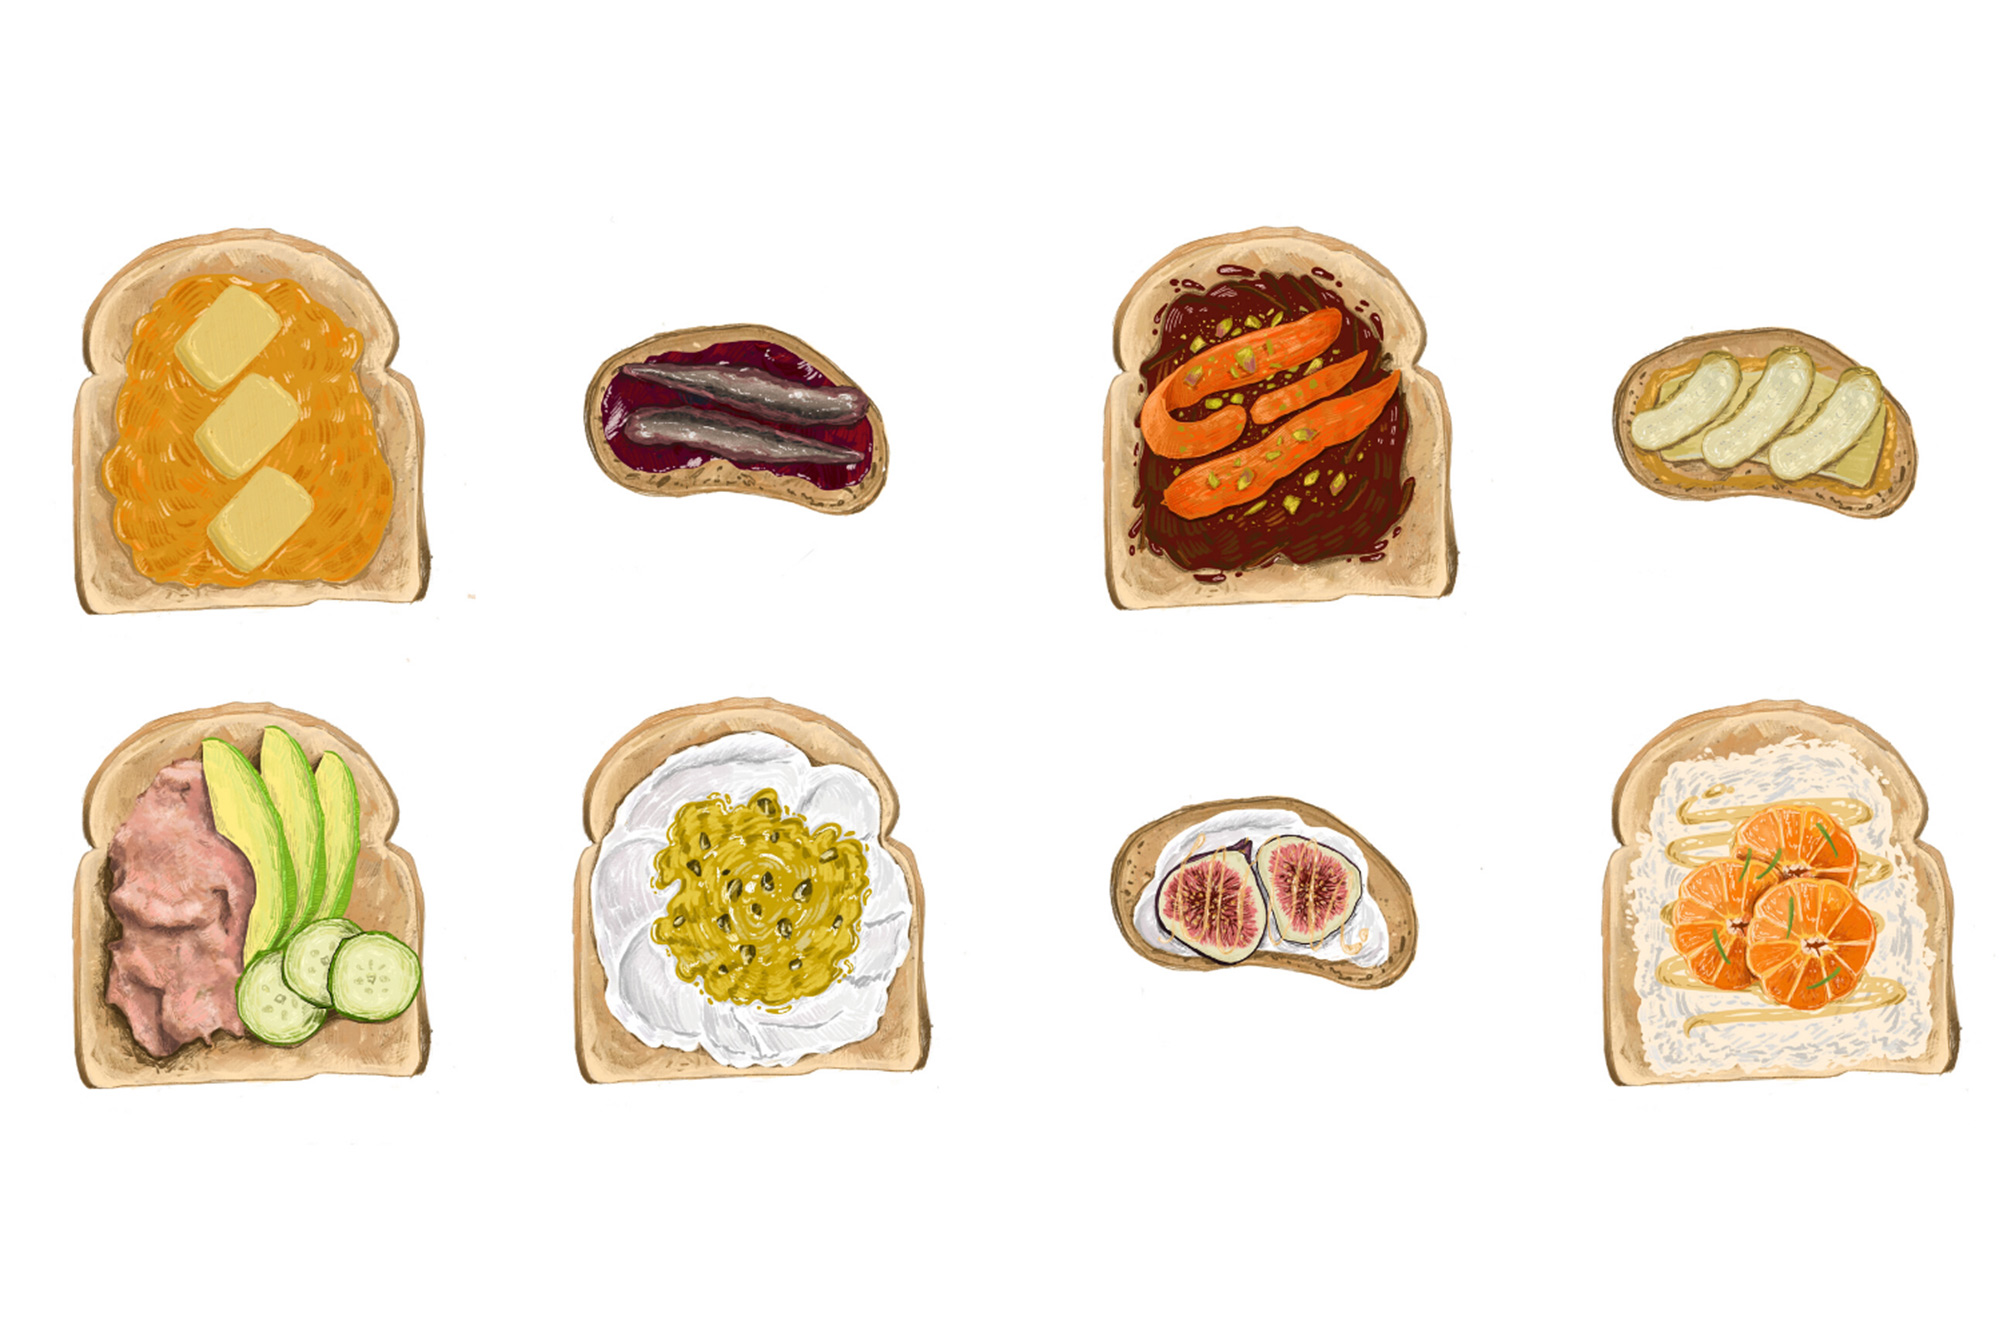 An illustrated series of six different toasts, some have butter and jam, others have cucumber and tuna, on a white background.